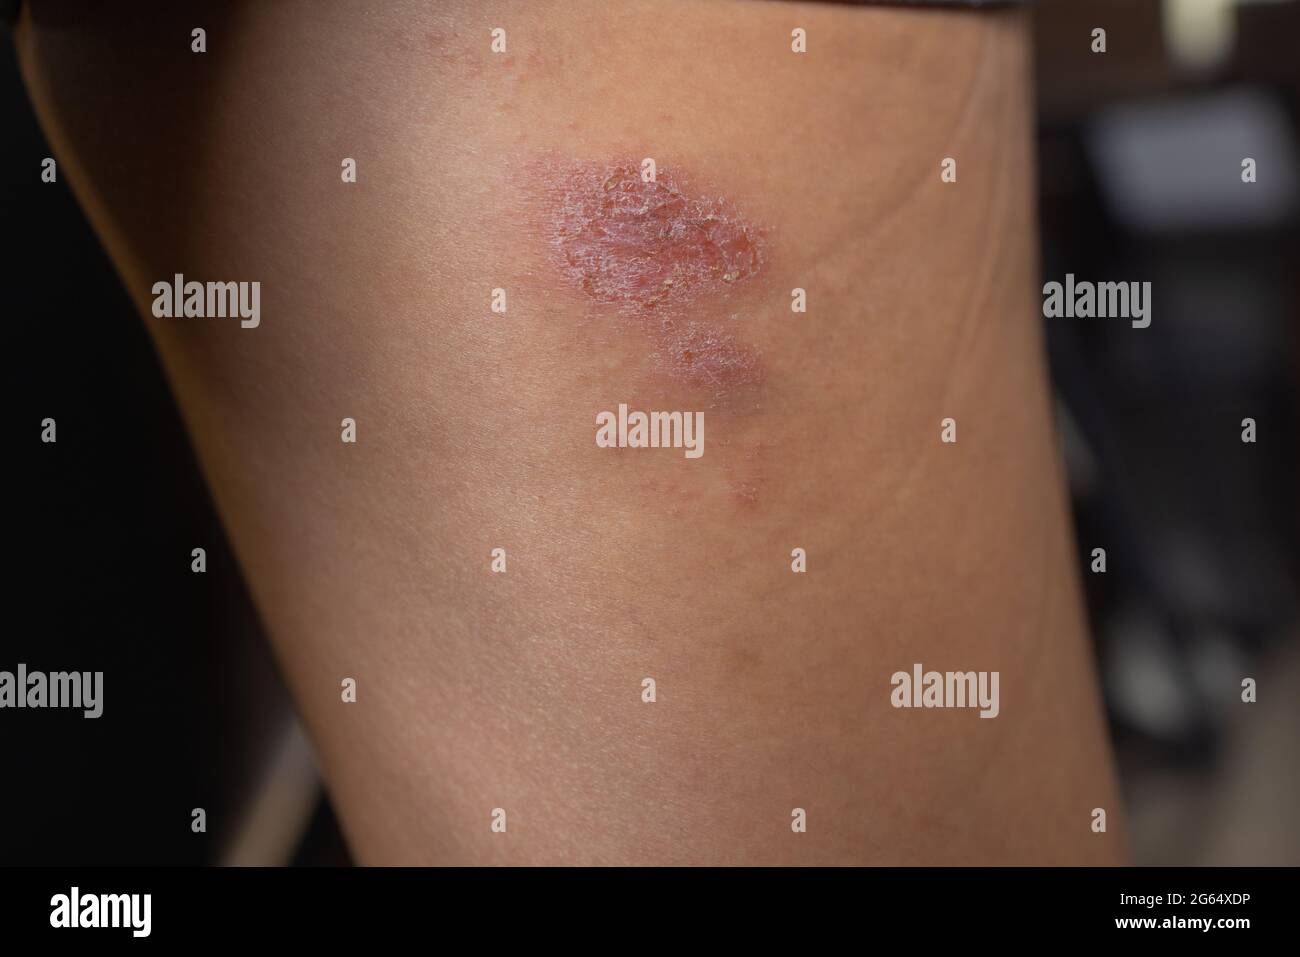 Abrasion on the woman's knee. Injured leg with a red wound. Medical treatment for first aid Stock Photo